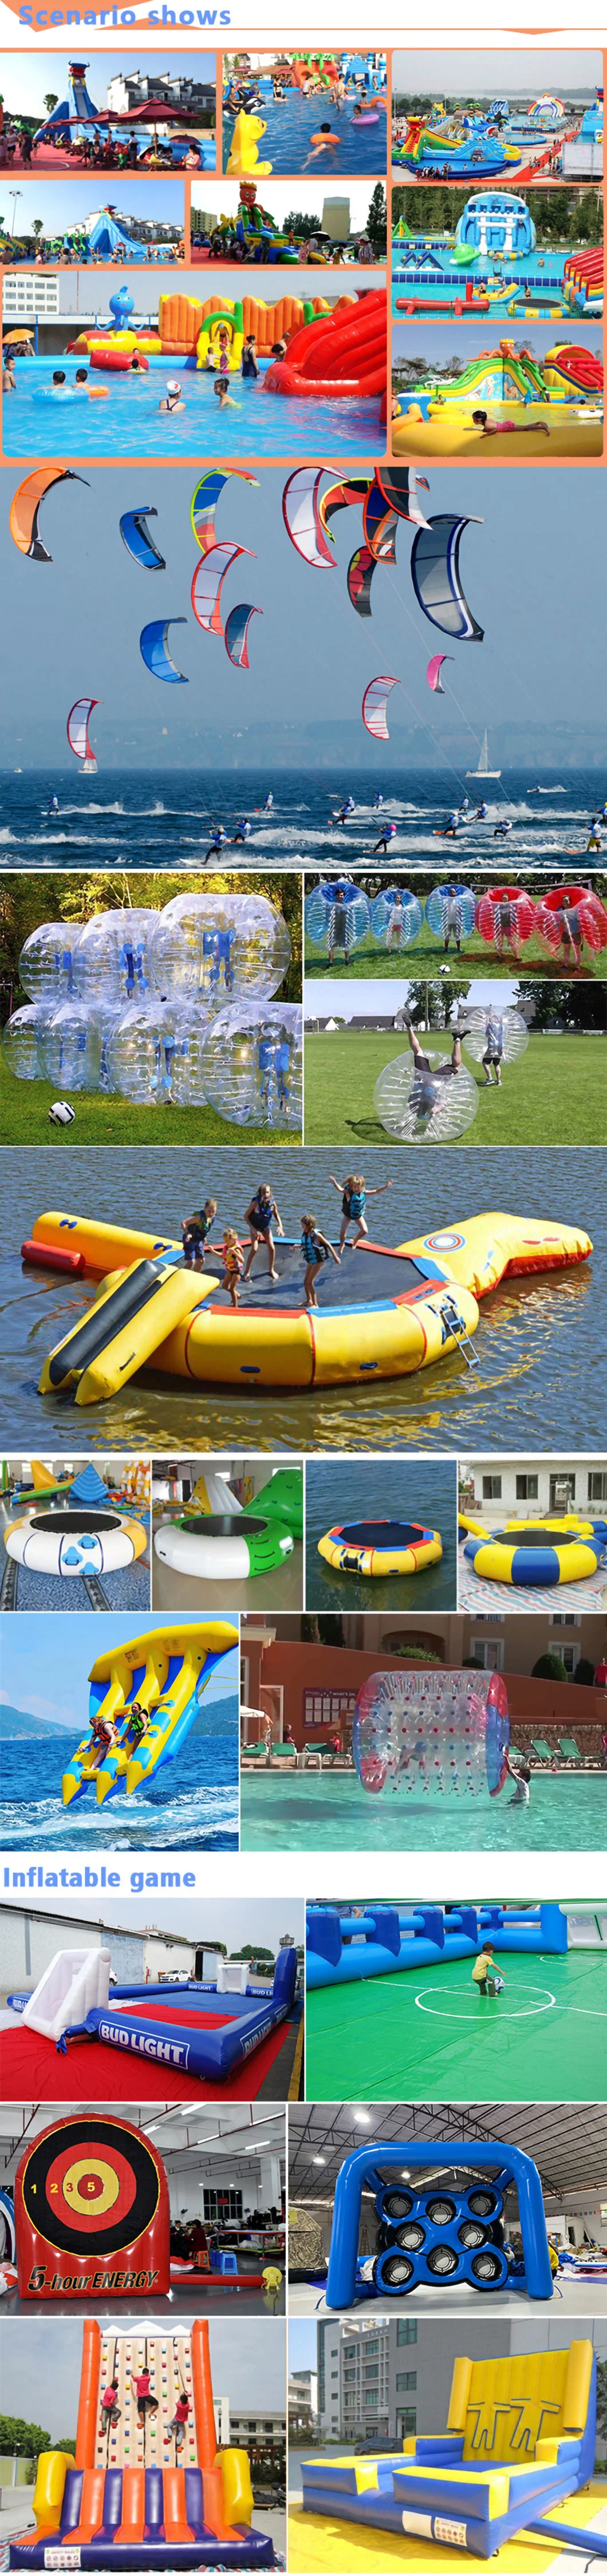 PVC Inflatable Water Sports Toys Hot Sale Inflatable Seesaw for Adult